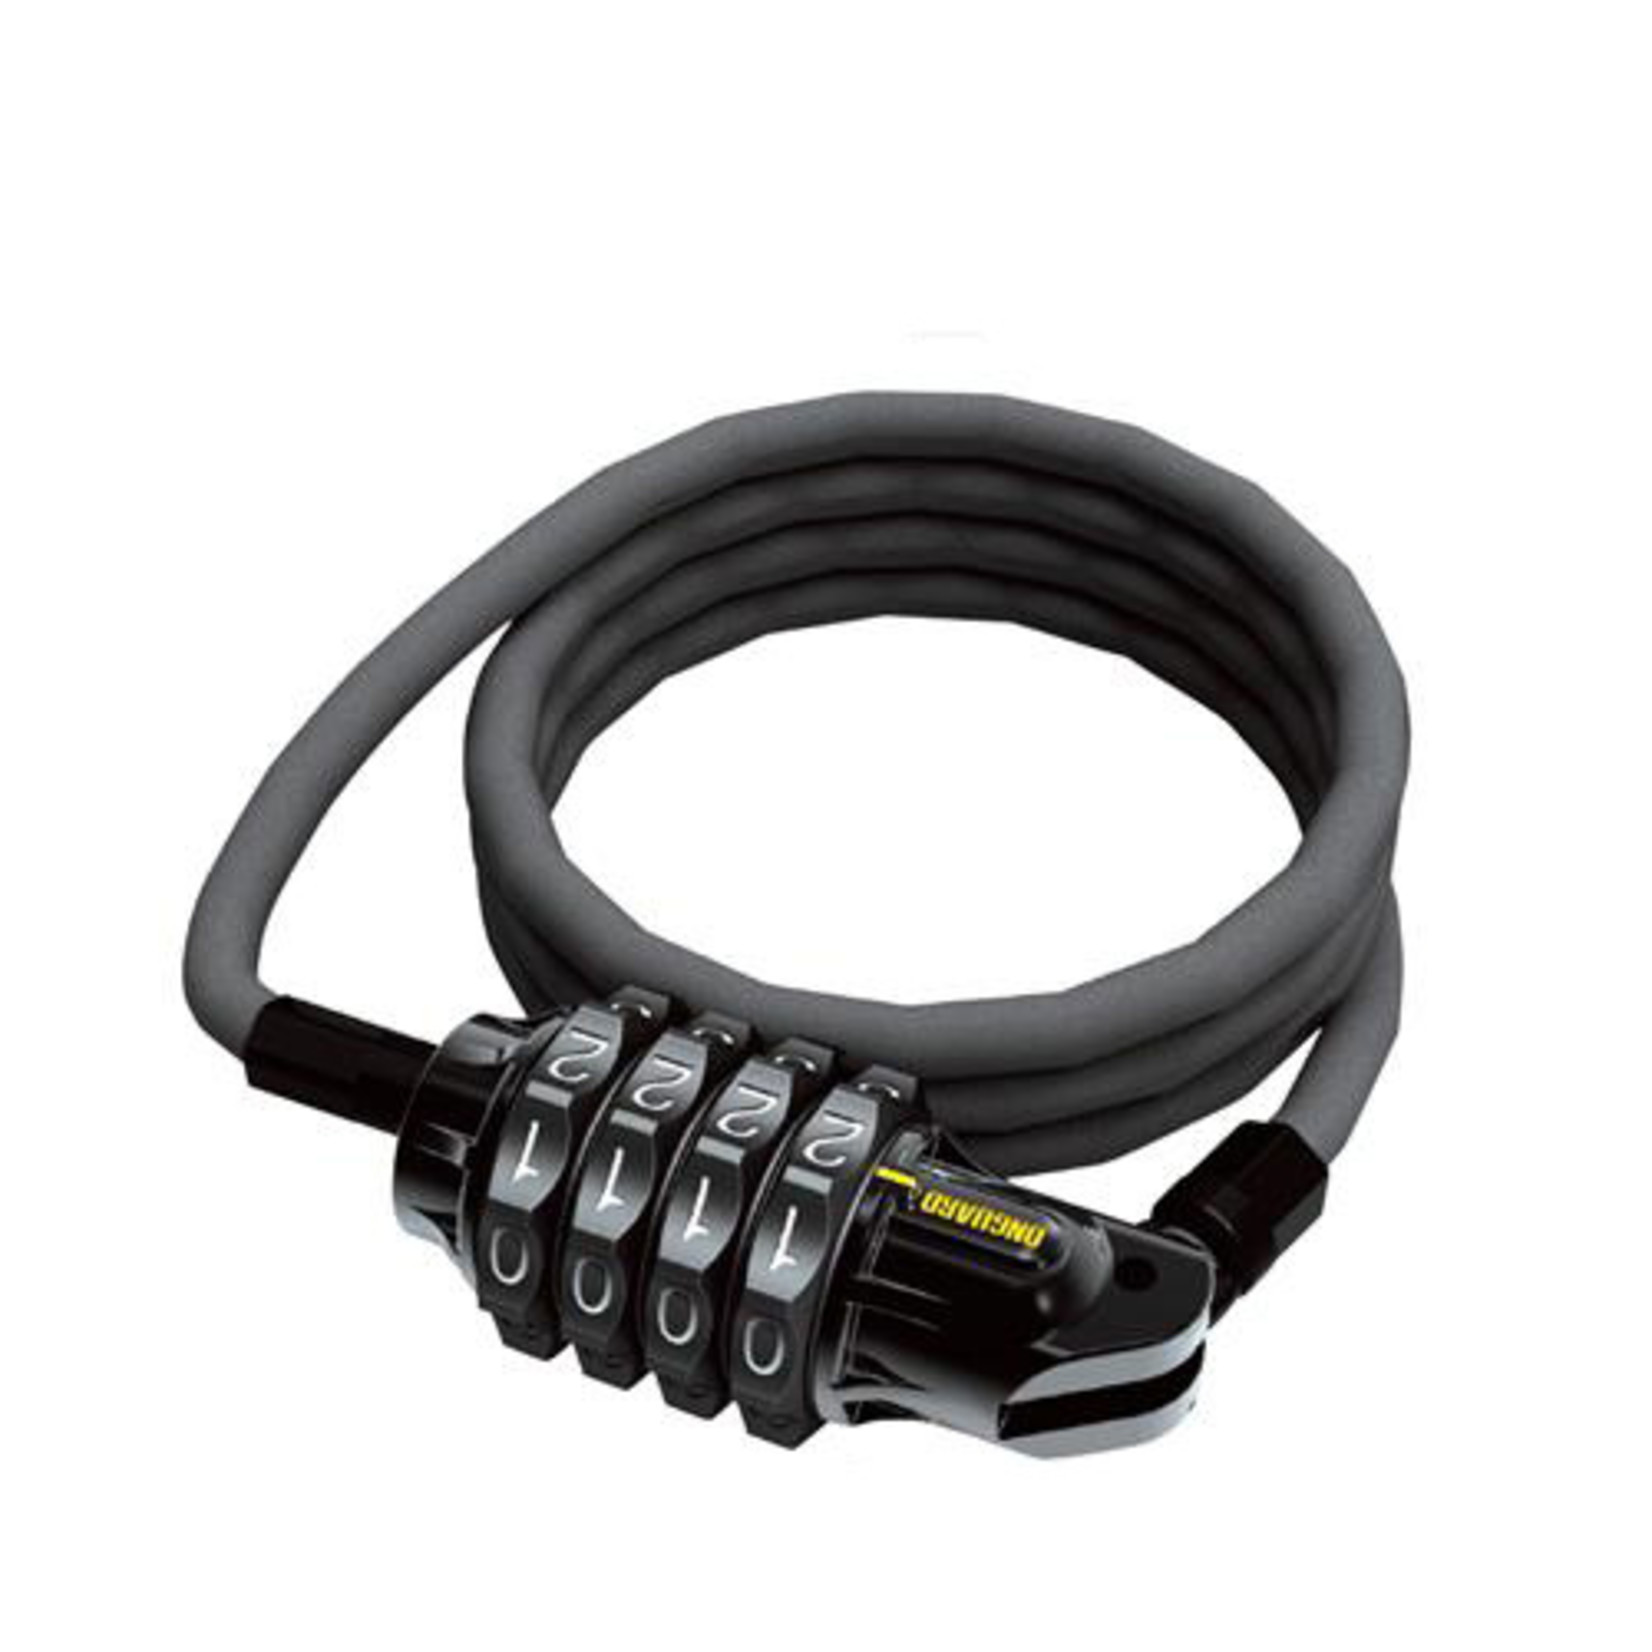 Onguard Onguard Bike Lock - Terrier Series - Coiled Cable Combo 4 - 120cm x 6mm